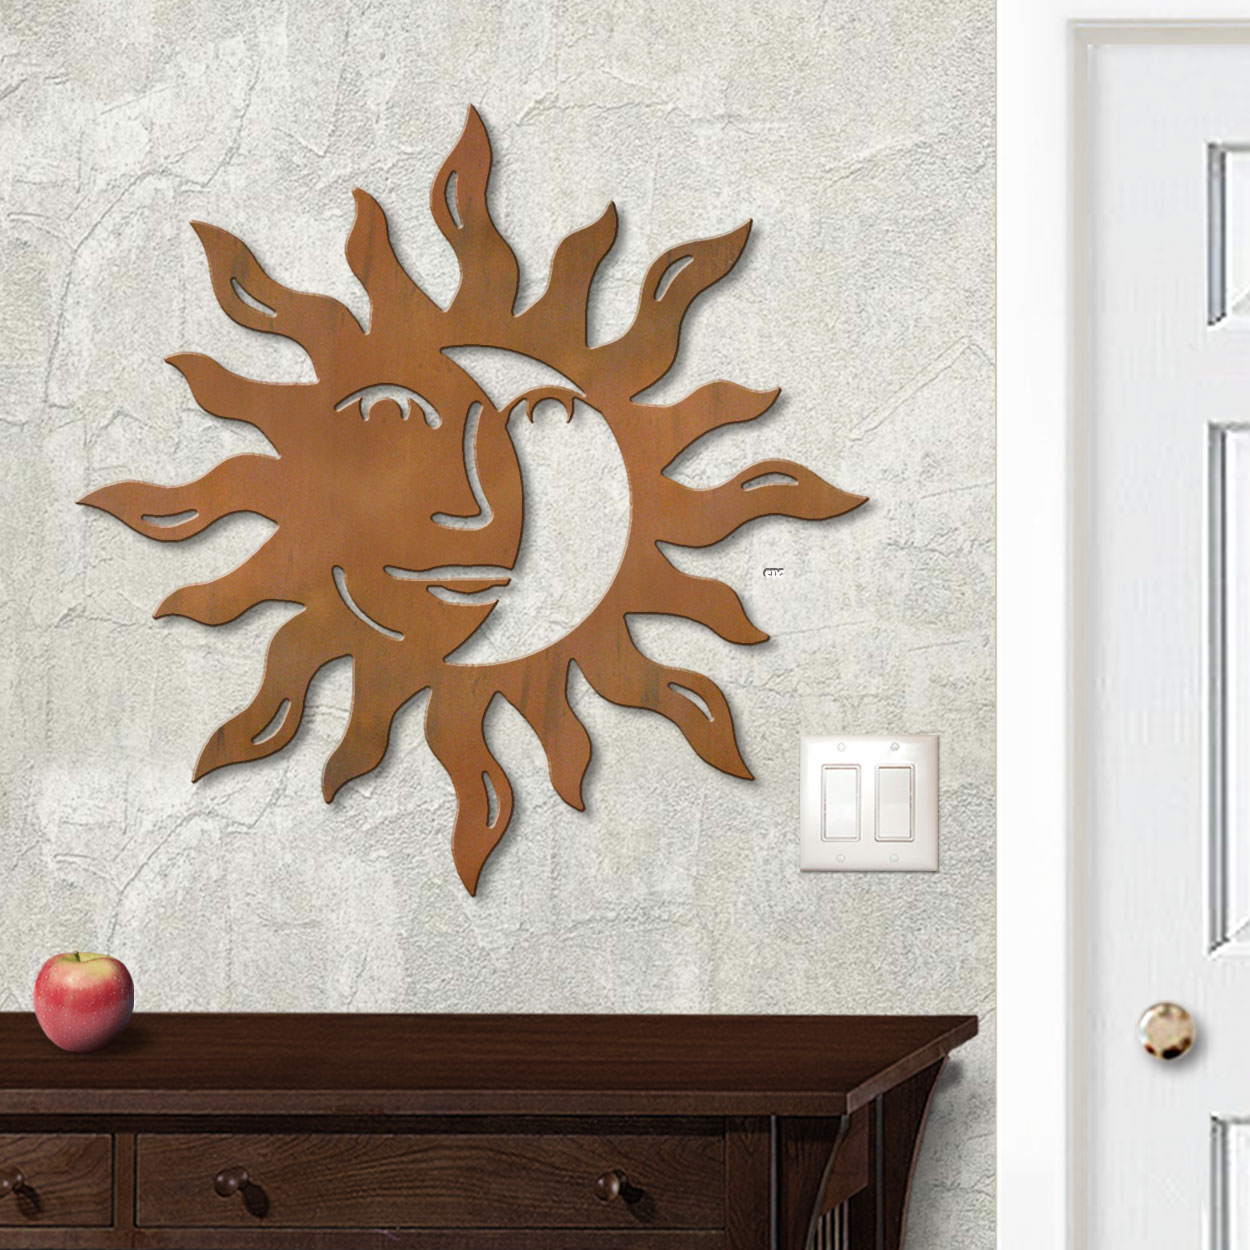 625040r - 18in or 24in Floating Metal Wall Art - Sunface Eclipse - Rust Patina